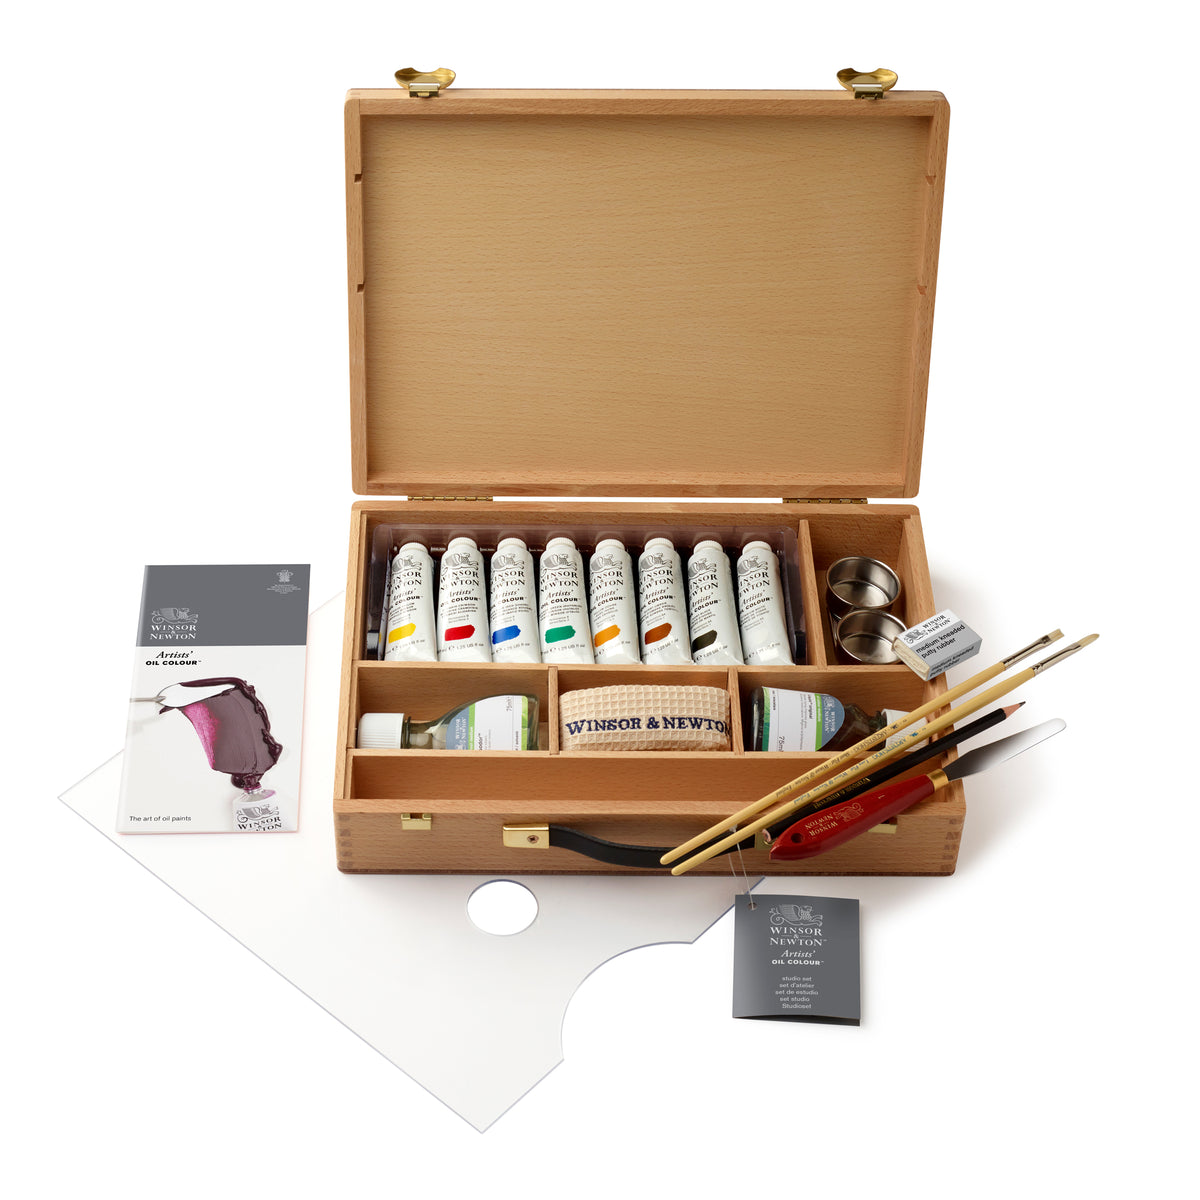 W&amp;N Artists Oil Tube Bamboo Travel Box - Includes Complimentary Artists Apron